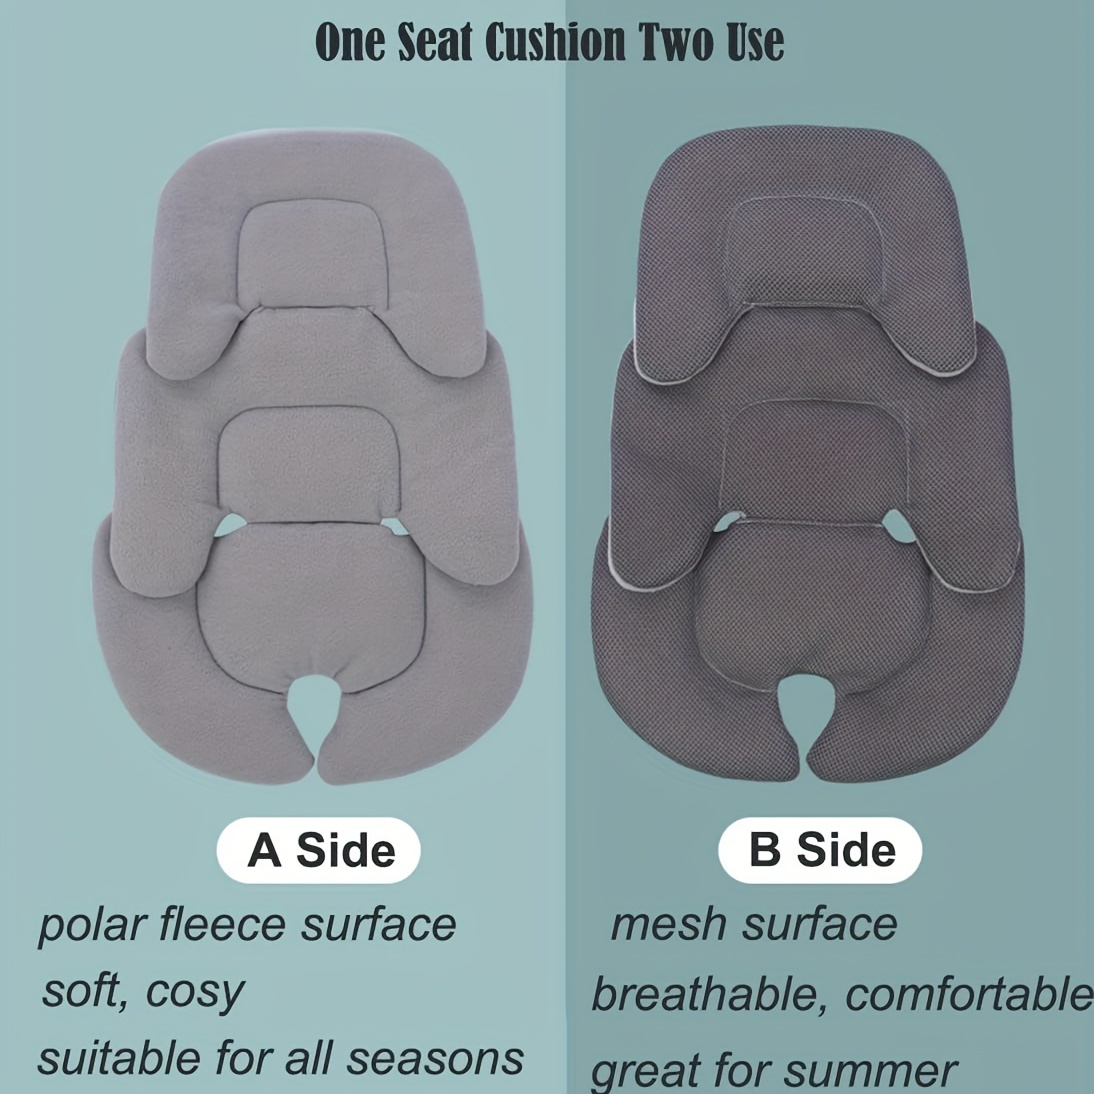 Multi-purpose comfort cushion - Products and accessories for baby